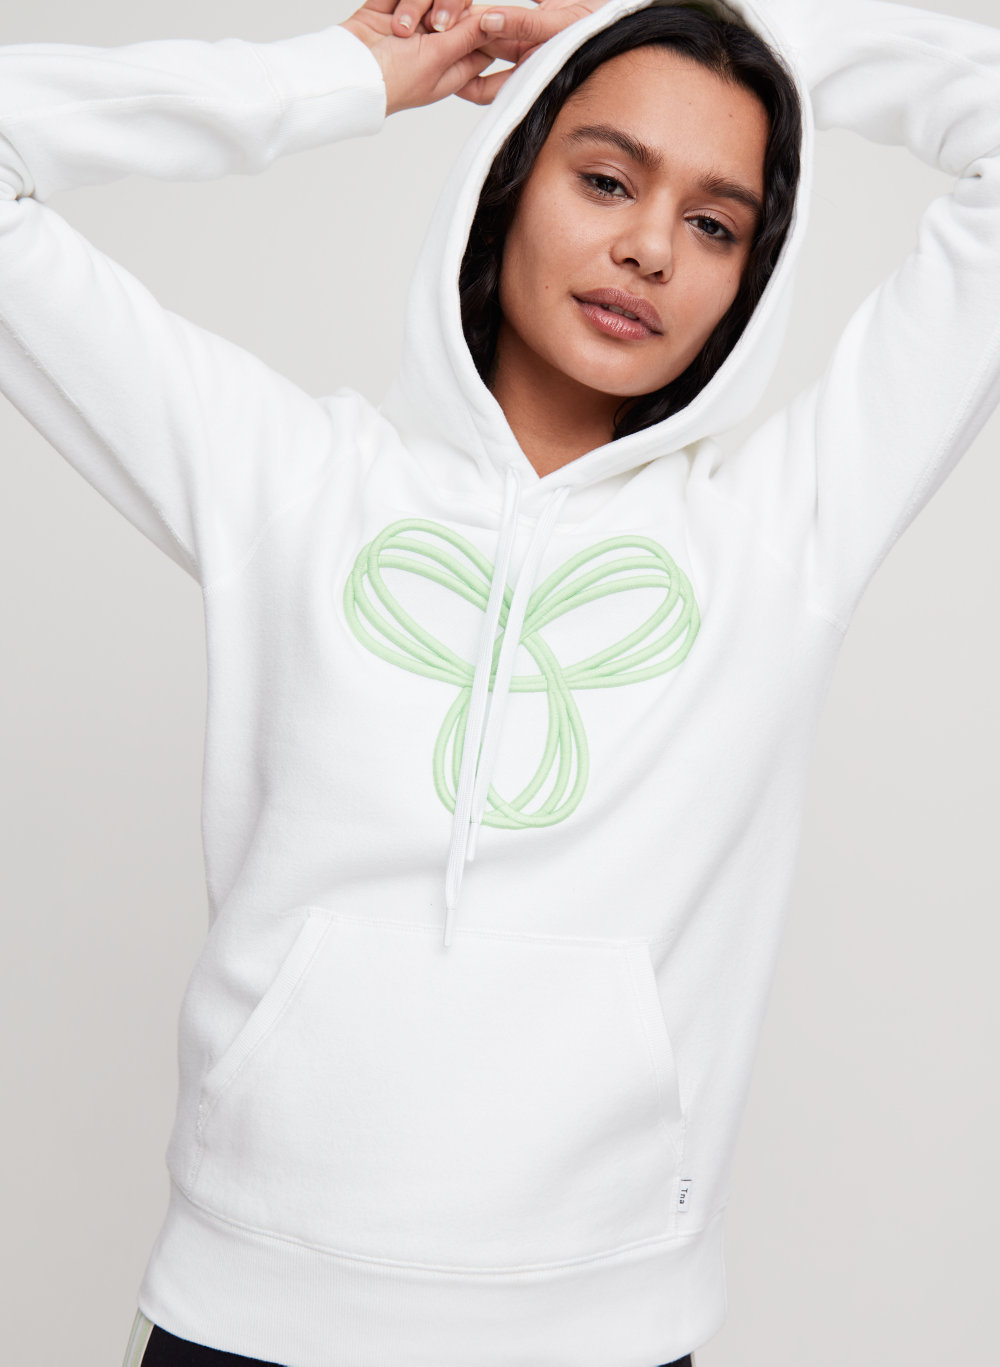 Tna Baltic Hoodie Aritzia Ca The tna hoodies that i'm talking about are: tna